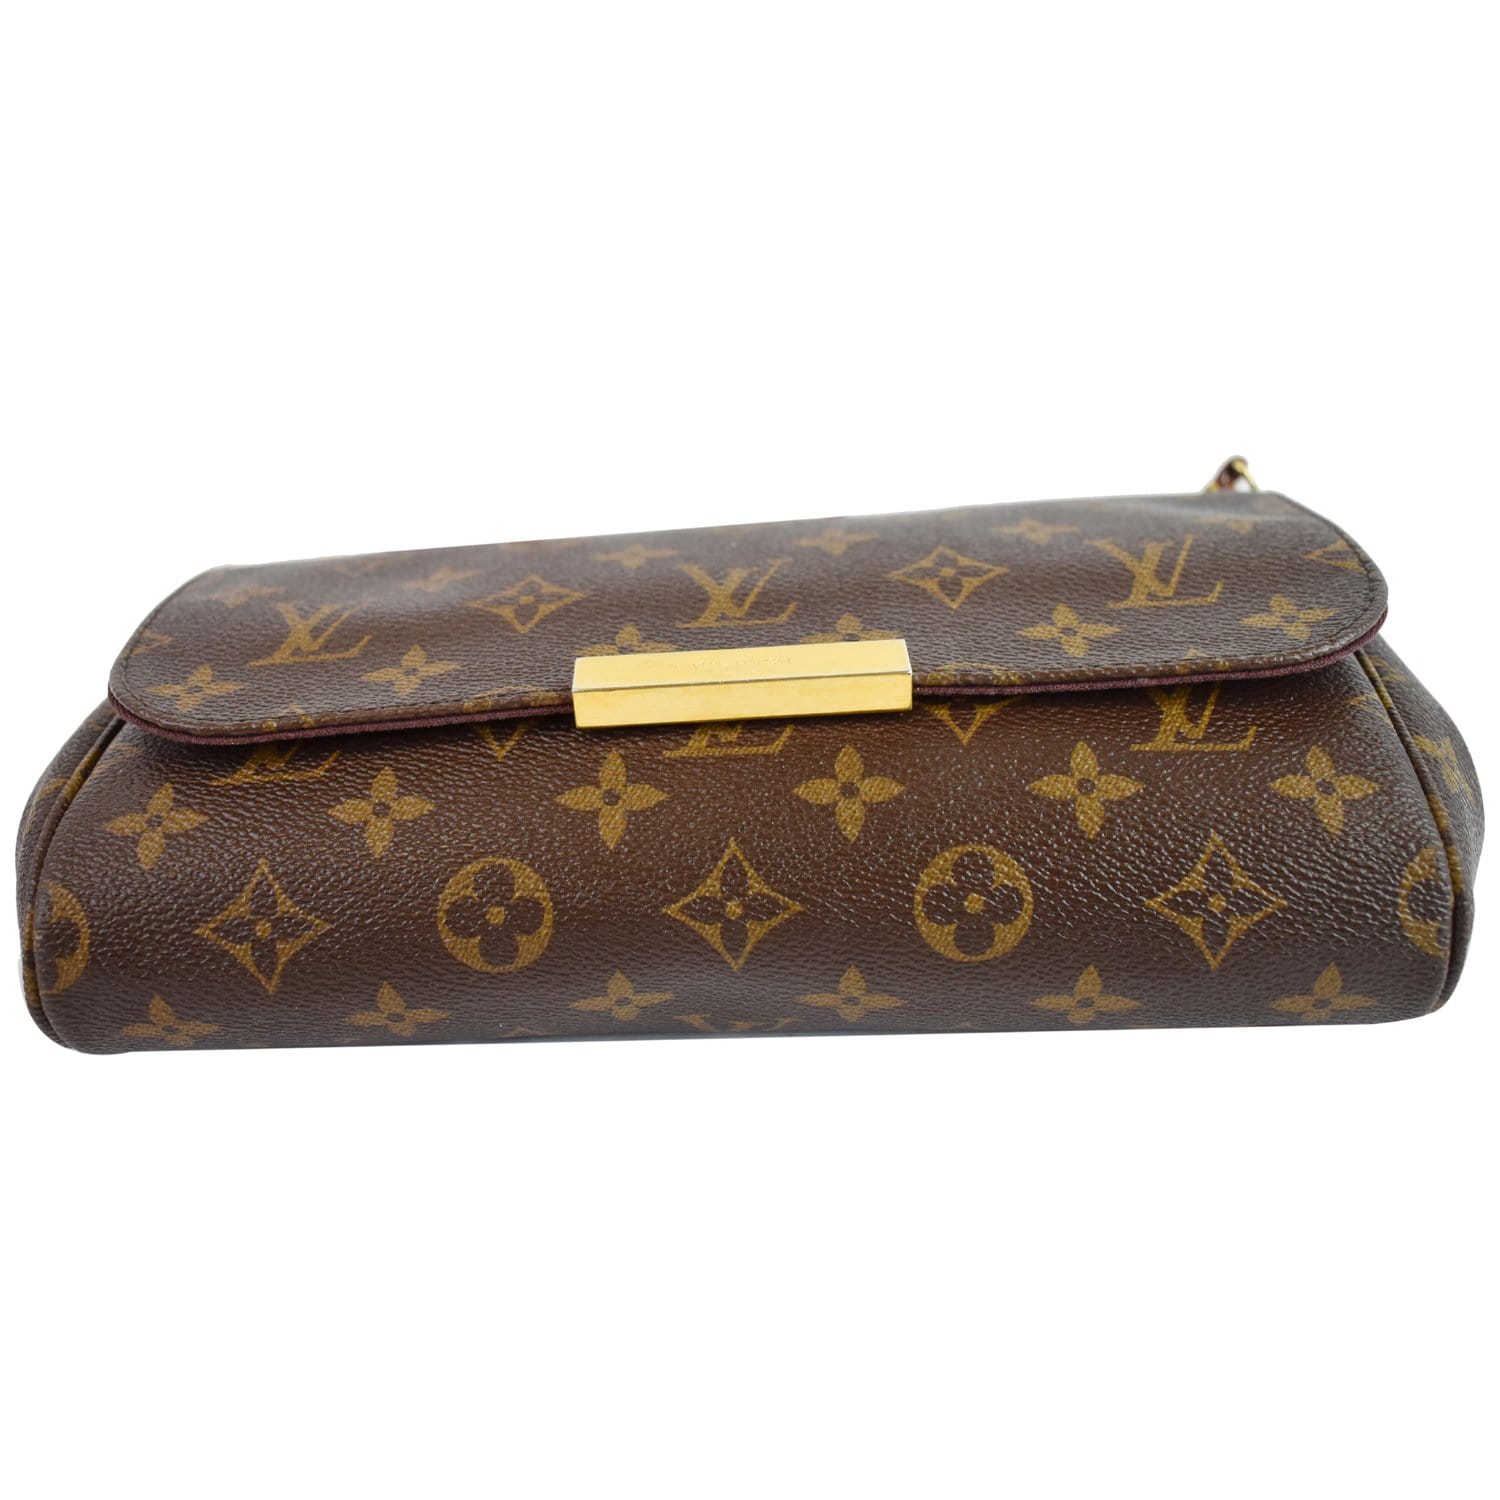 Louis Vuitton Handbag in Brown Monogram Canvas and Natural Leather